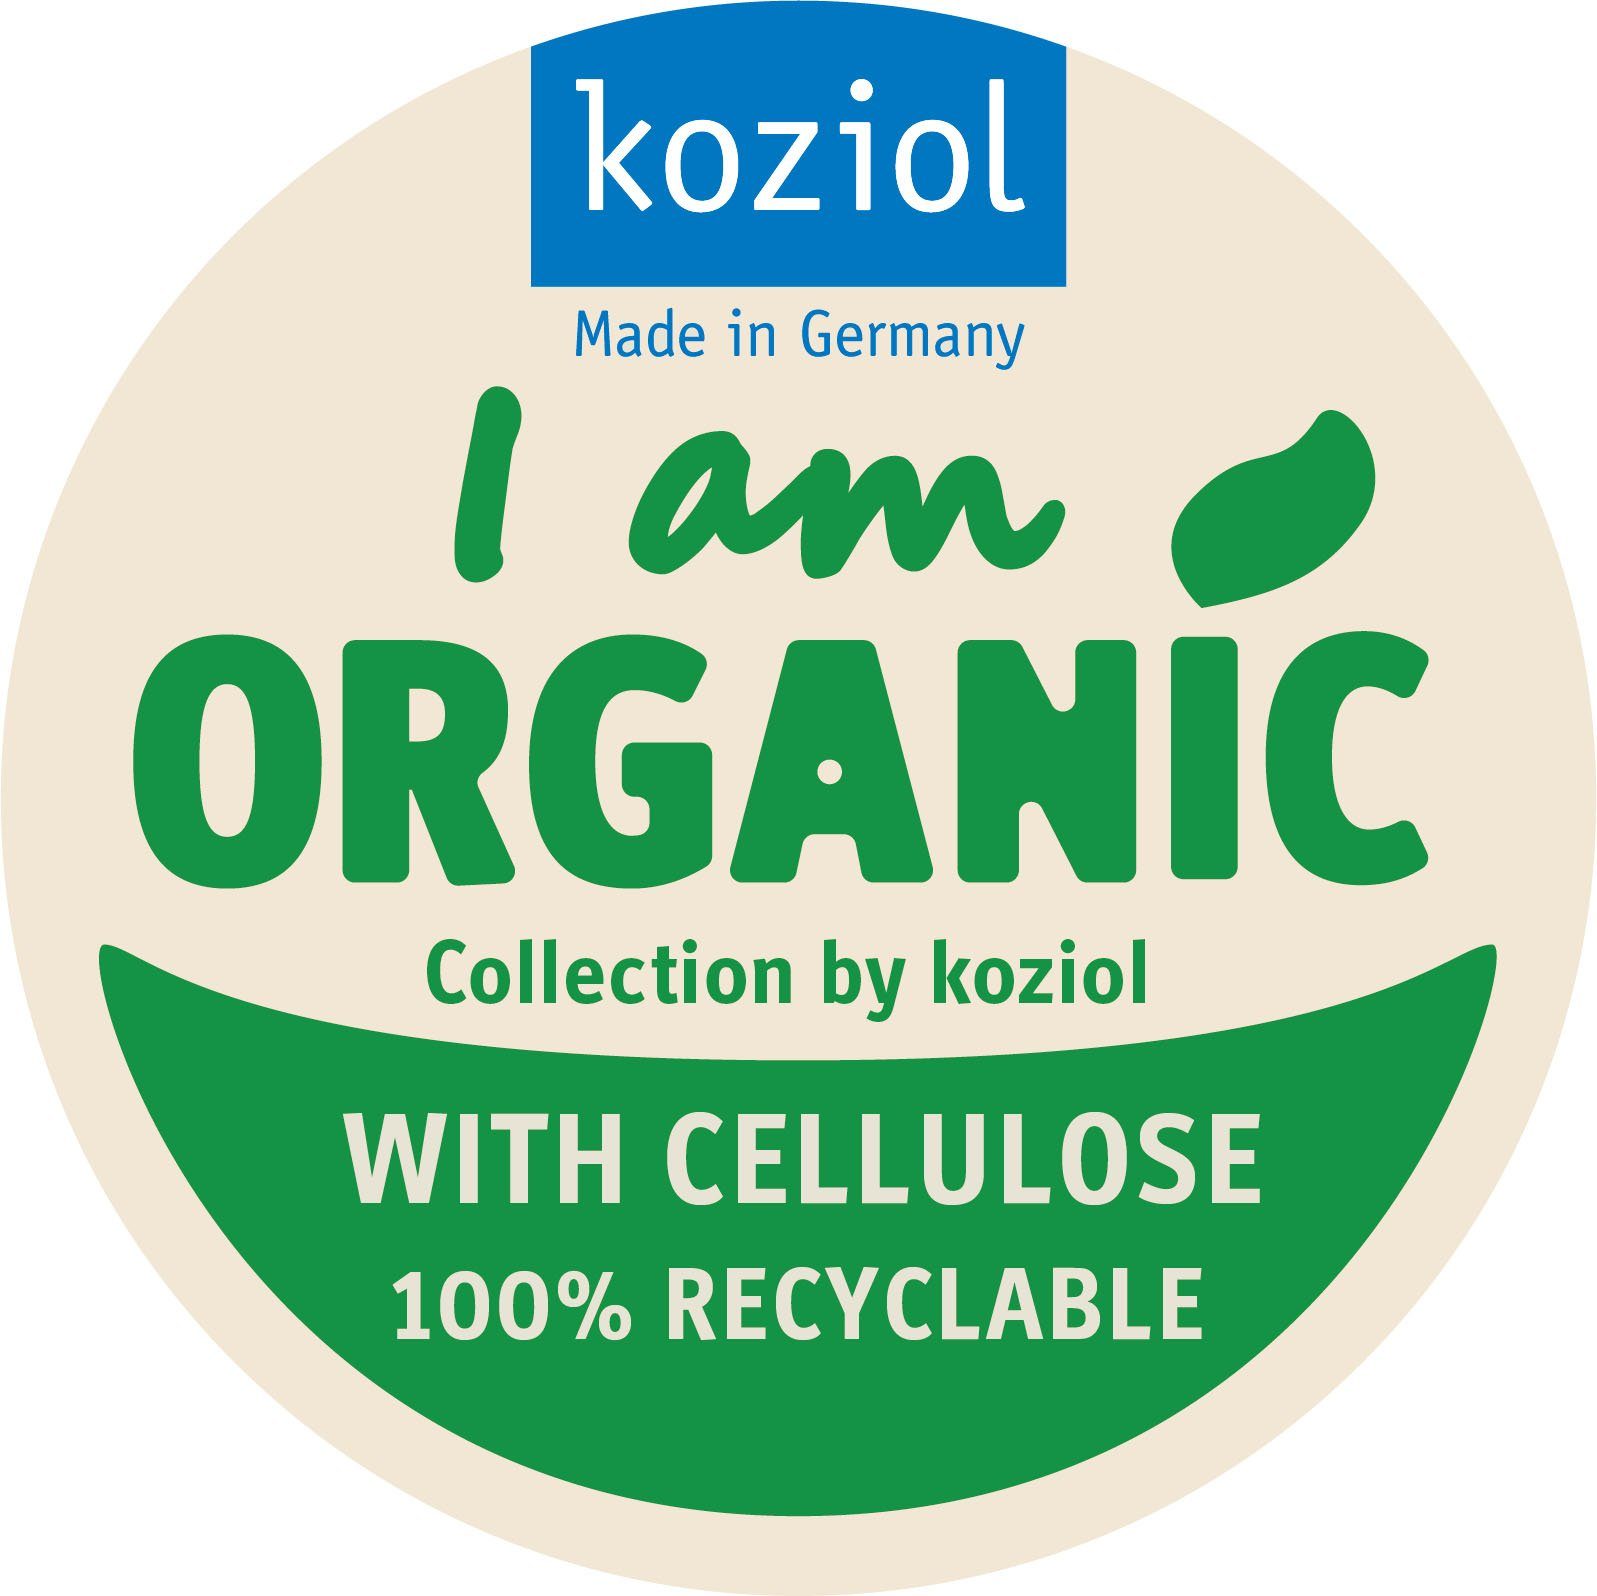 TO biobasiertes MONTAG Coffee-to-go-Becher ISO Holz, KOZIOL Kunststoff, GO IST…, Material,doppelwandig,melaminfrei,recycelbar,400ml 100%